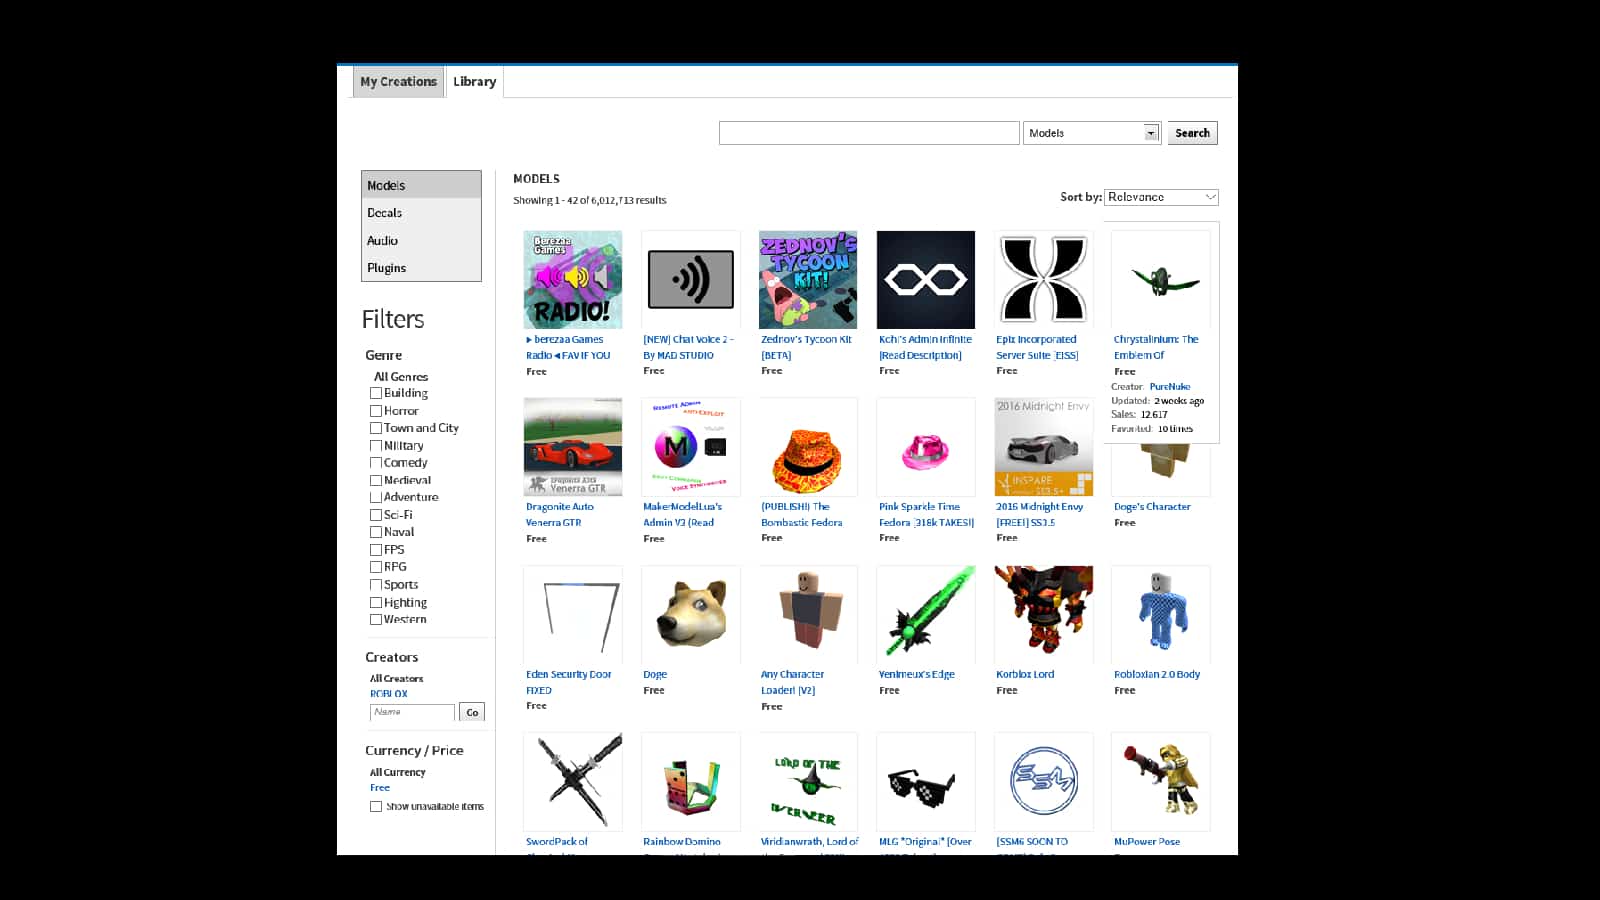 How can I get the name & ID of all Roblox catalog items